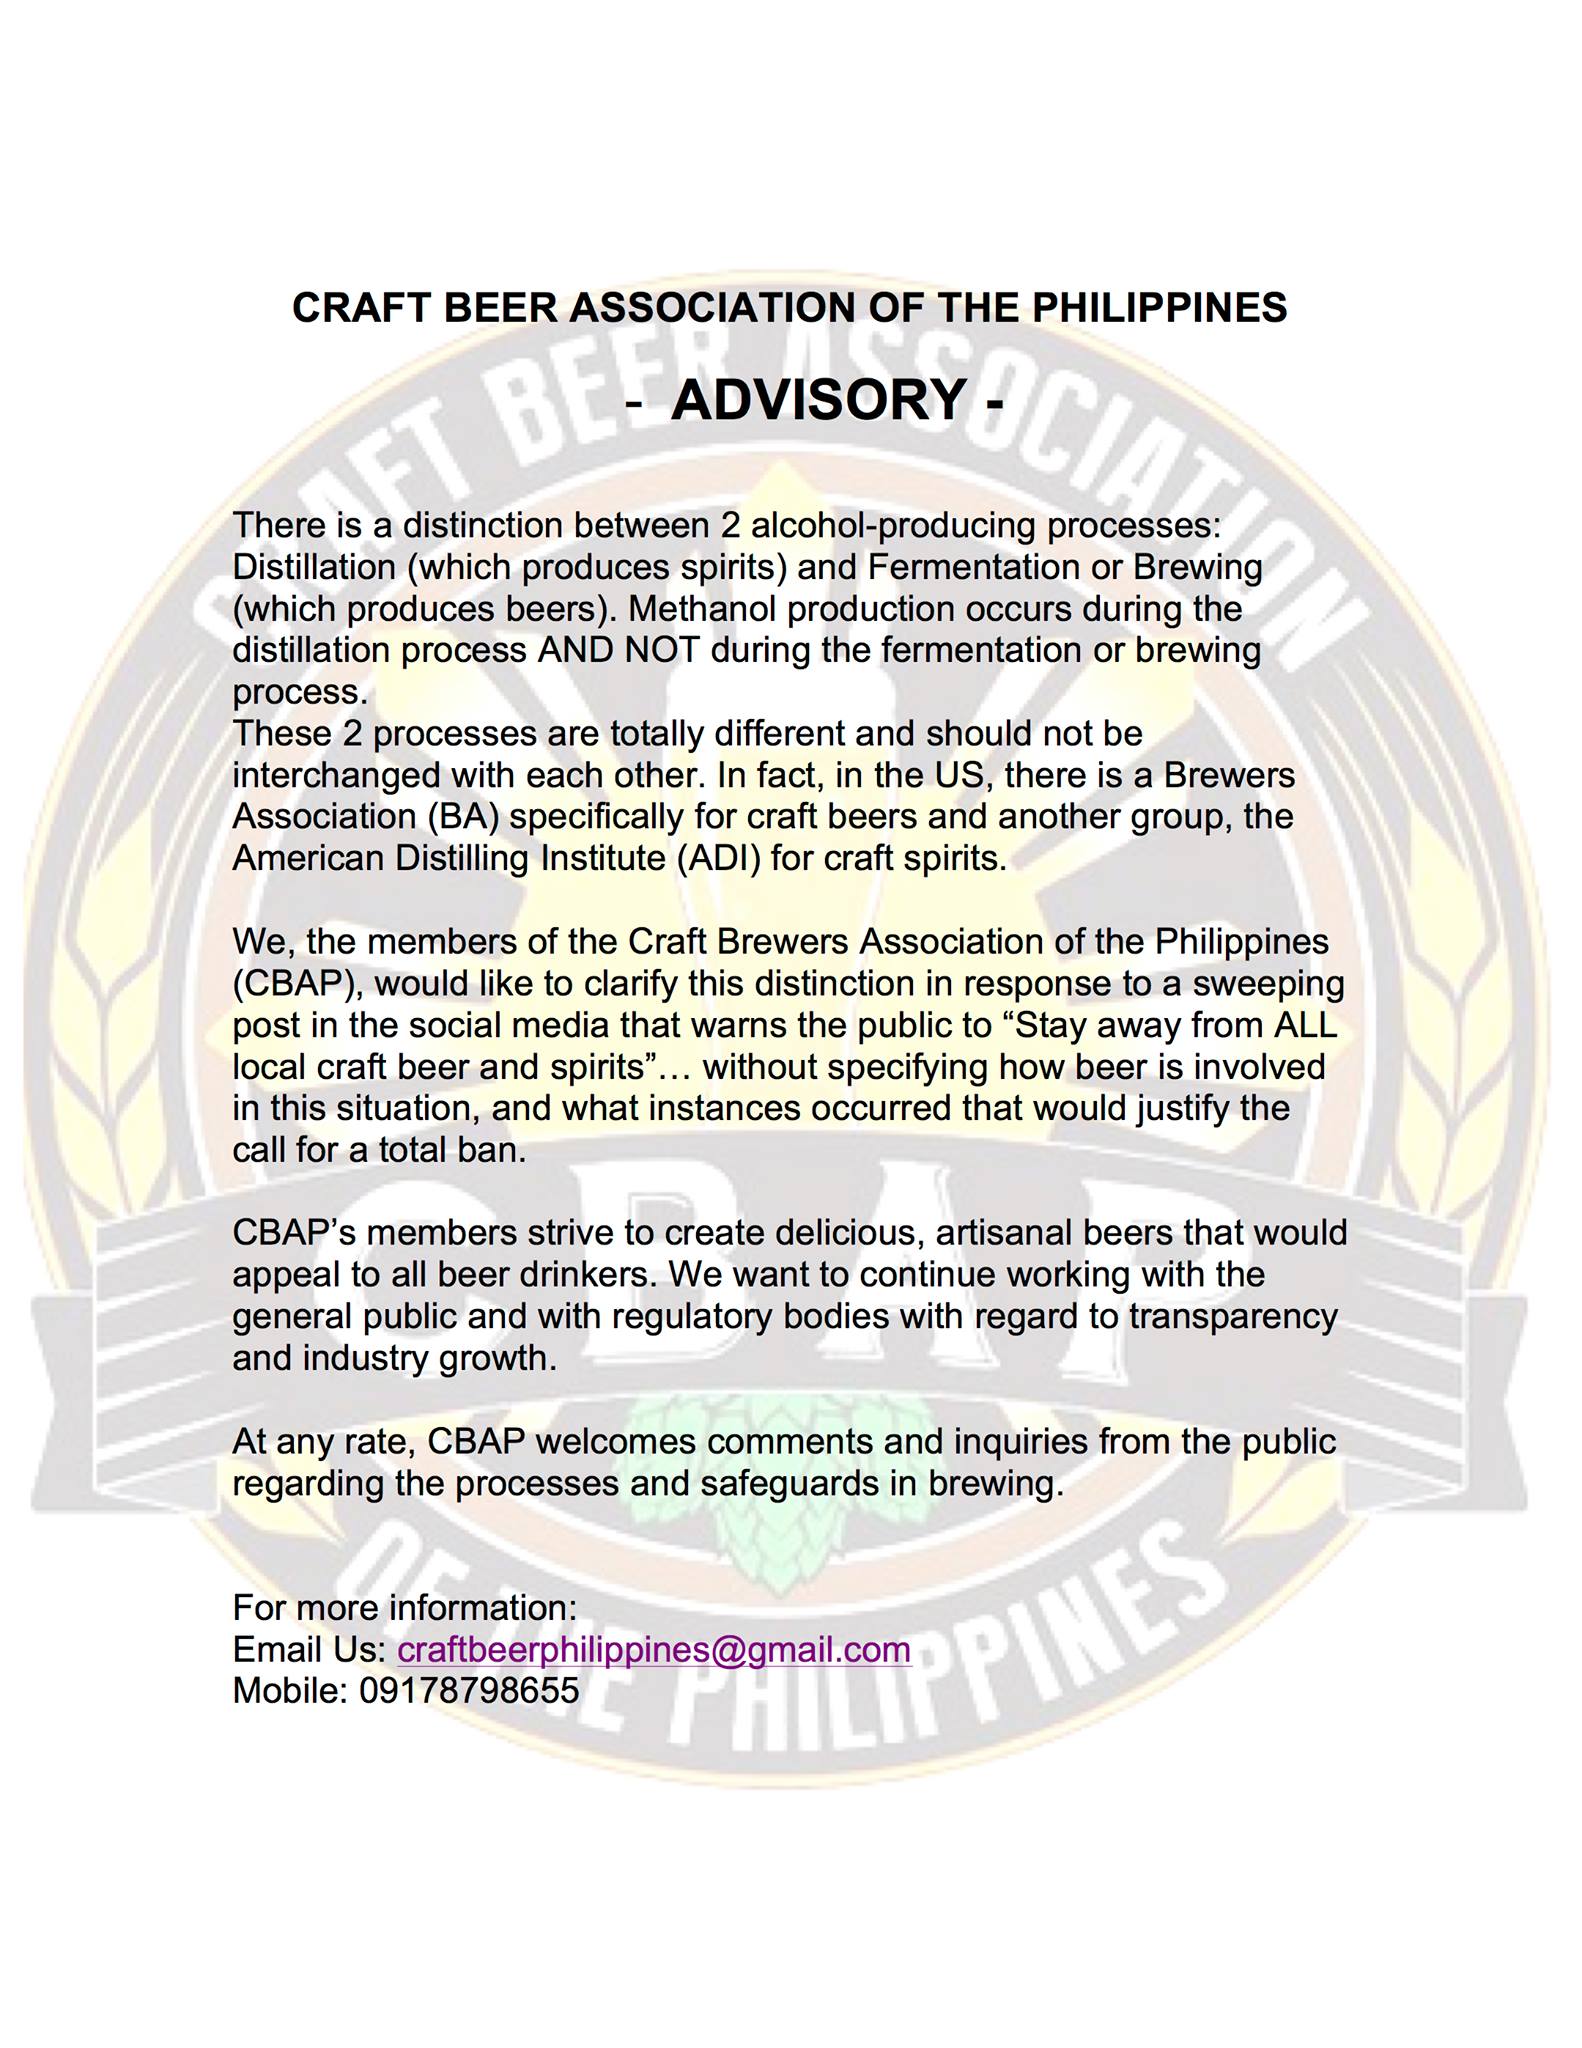 Craft Beer Association of the Philippines